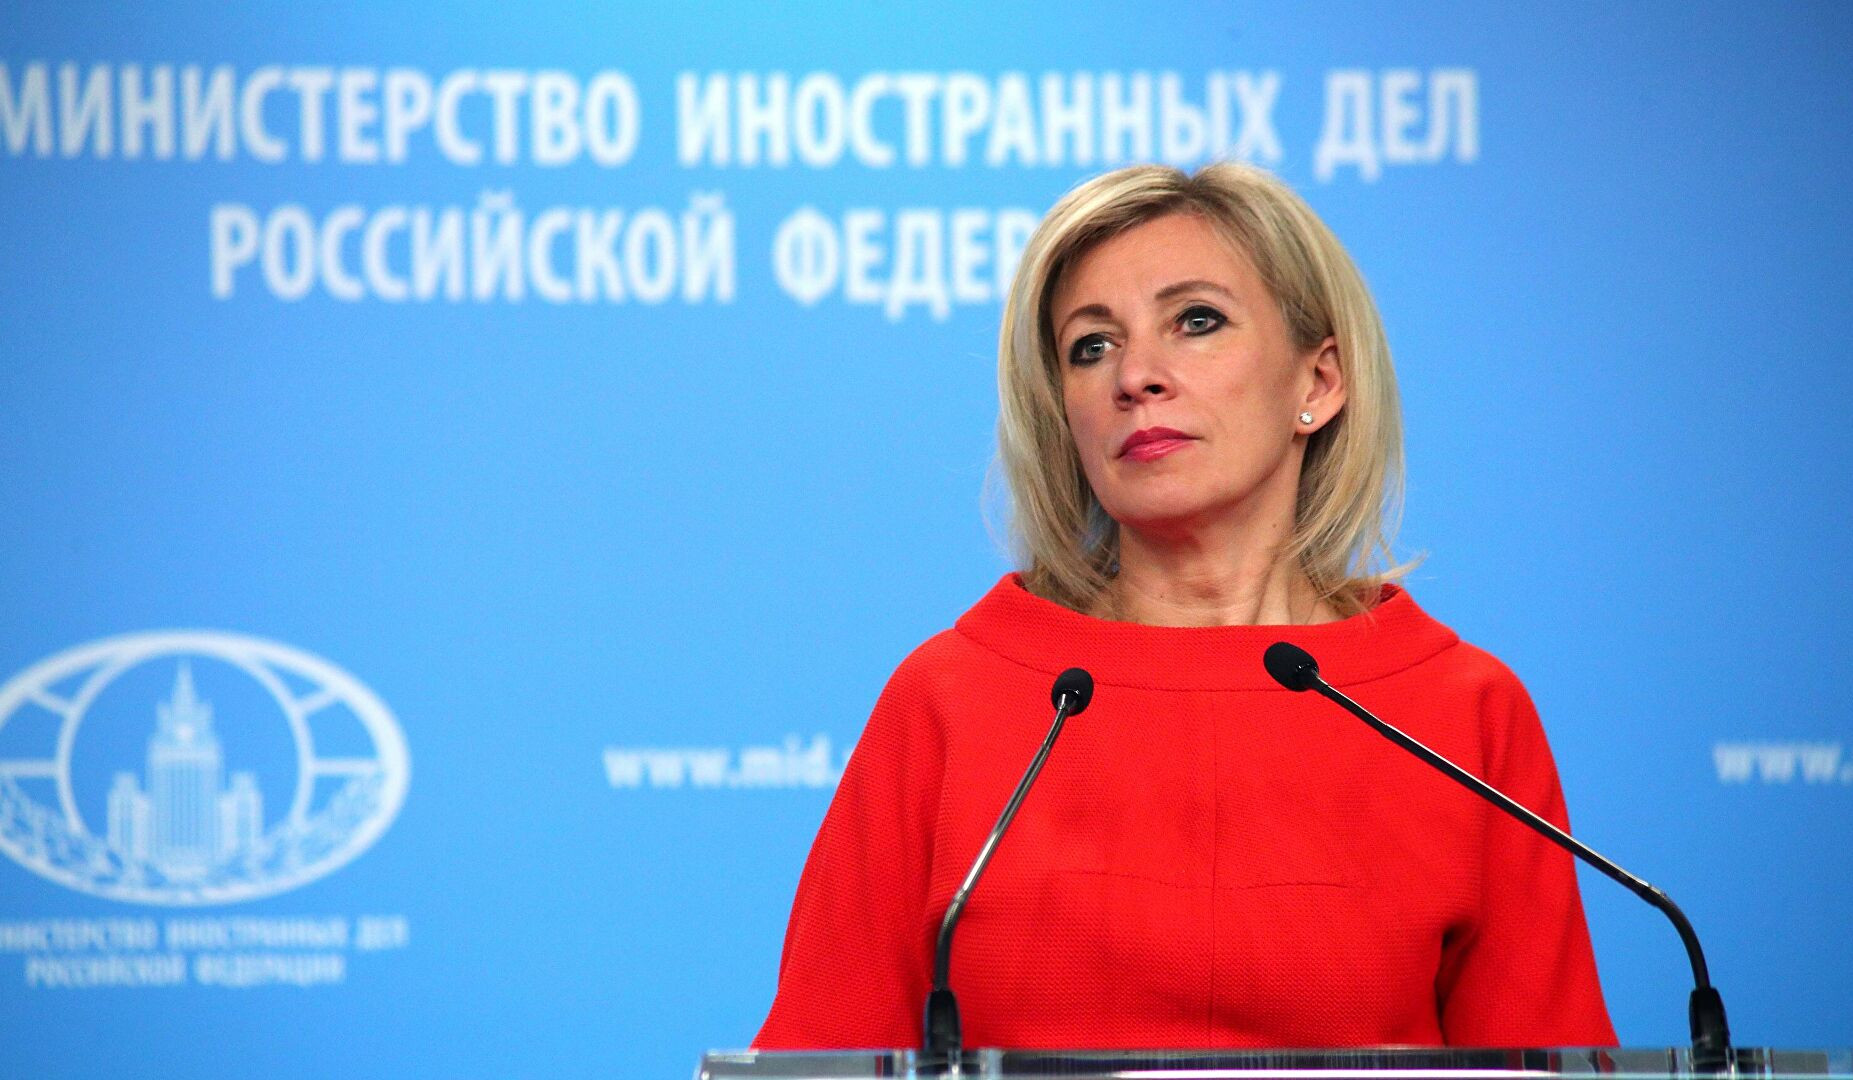 Russia does not withdraw from dialogue with US, ready to negotiate: Zakharova